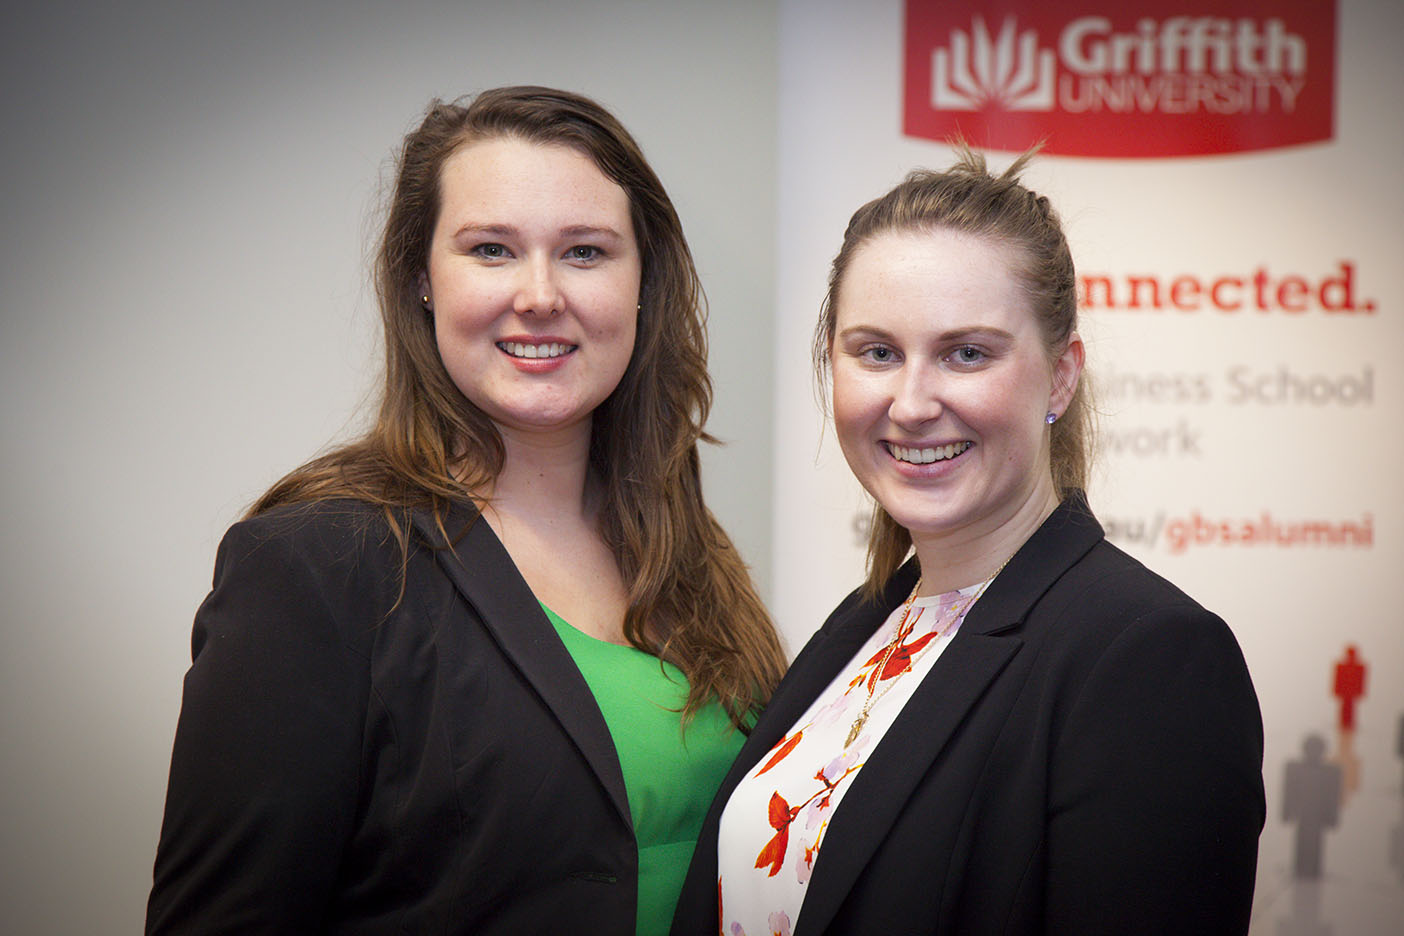 Emma Trapski, left, and Jennifer Schwarz agree that the growth of Griffith University is enhancing opportunities for students